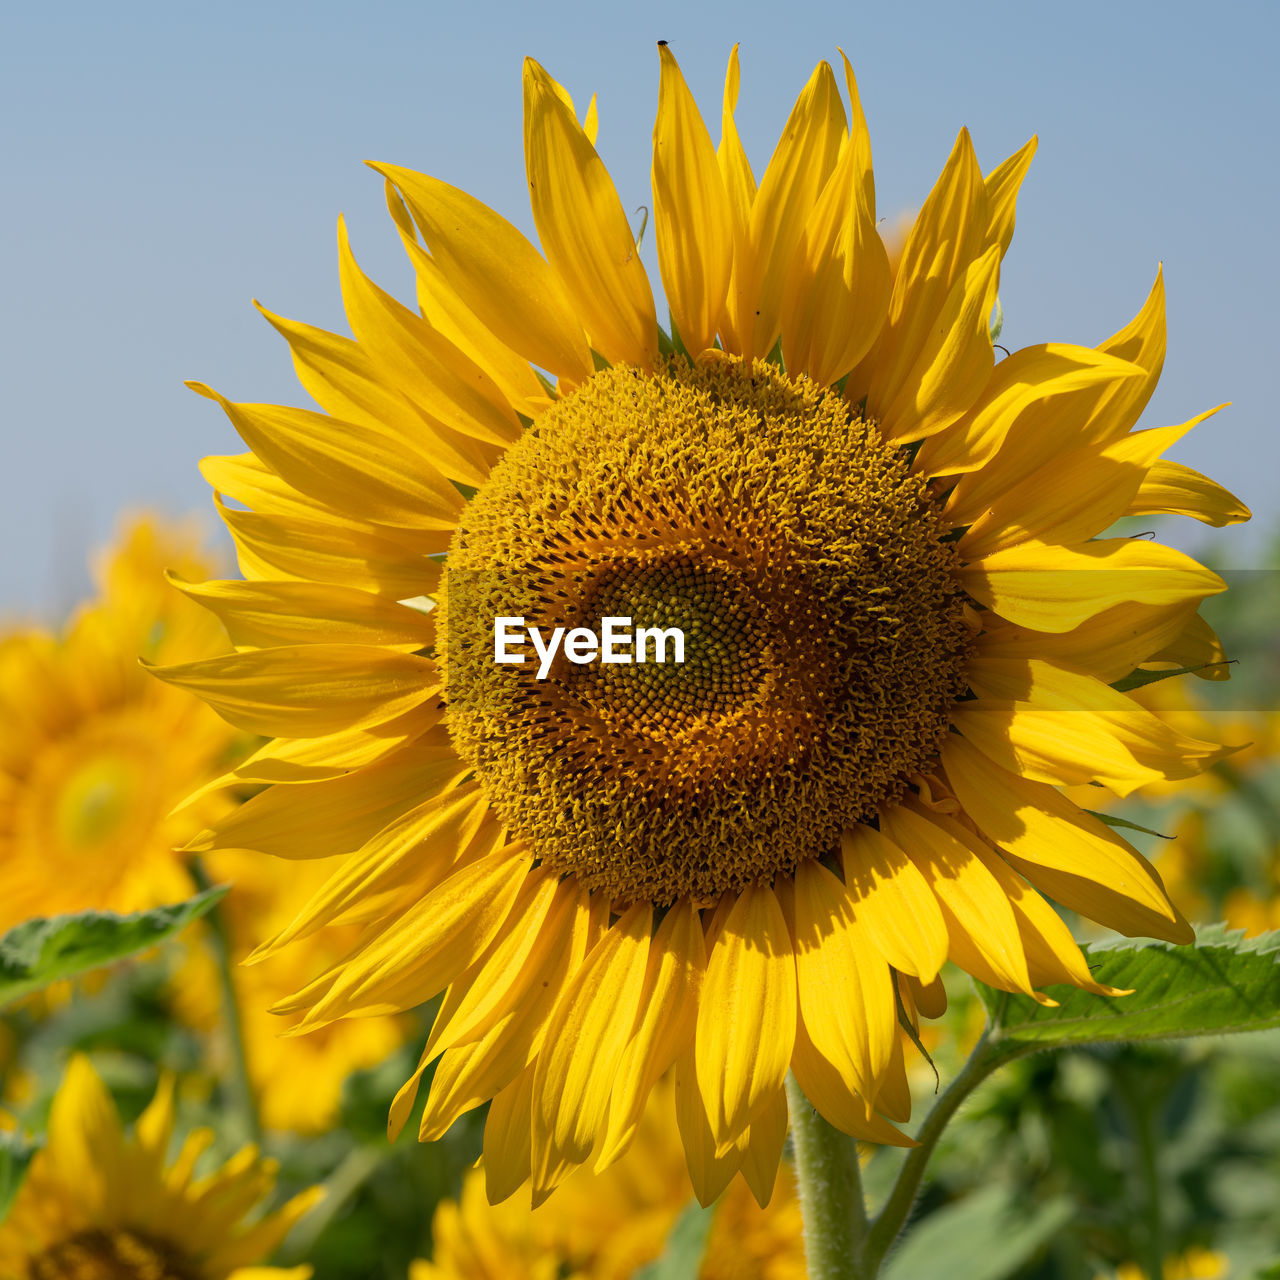 CLOSE-UP OF YELLOW SUNFLOWER ON FIELD